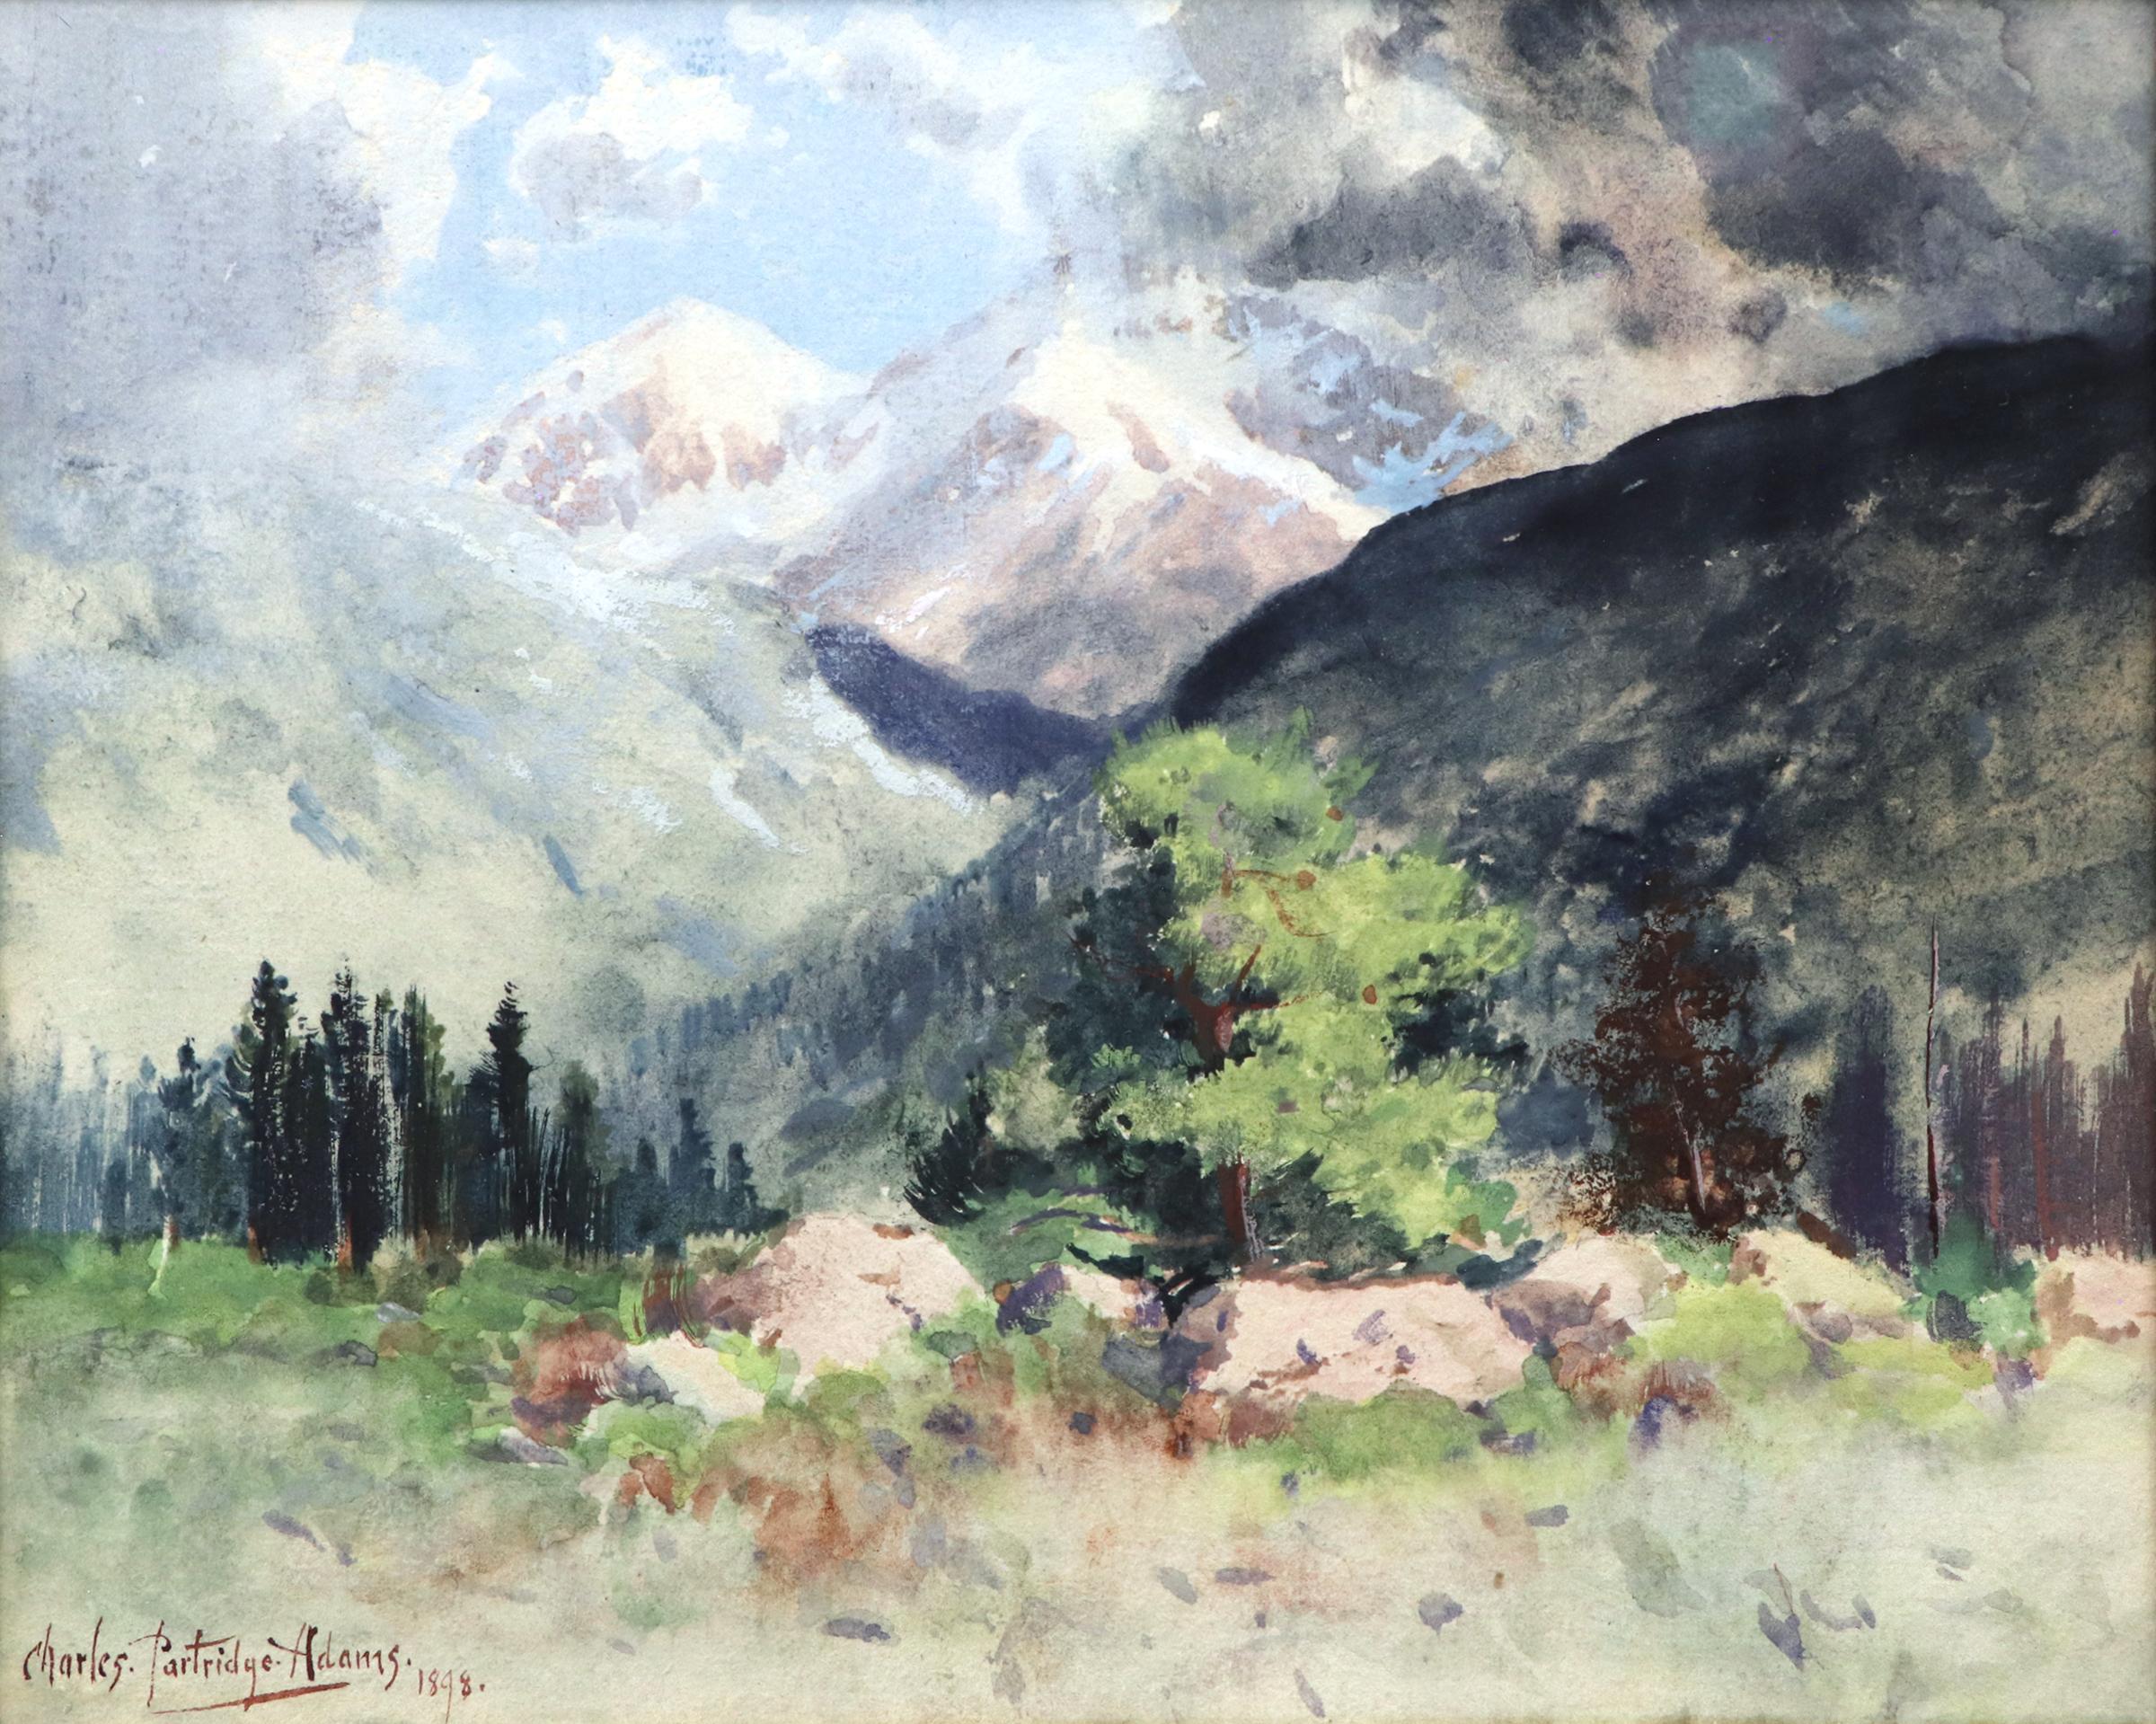 1890s Colorado Springtime Mountain Landscape Watercolor Painting - American Impressionist Art by Charles Partridge Adams